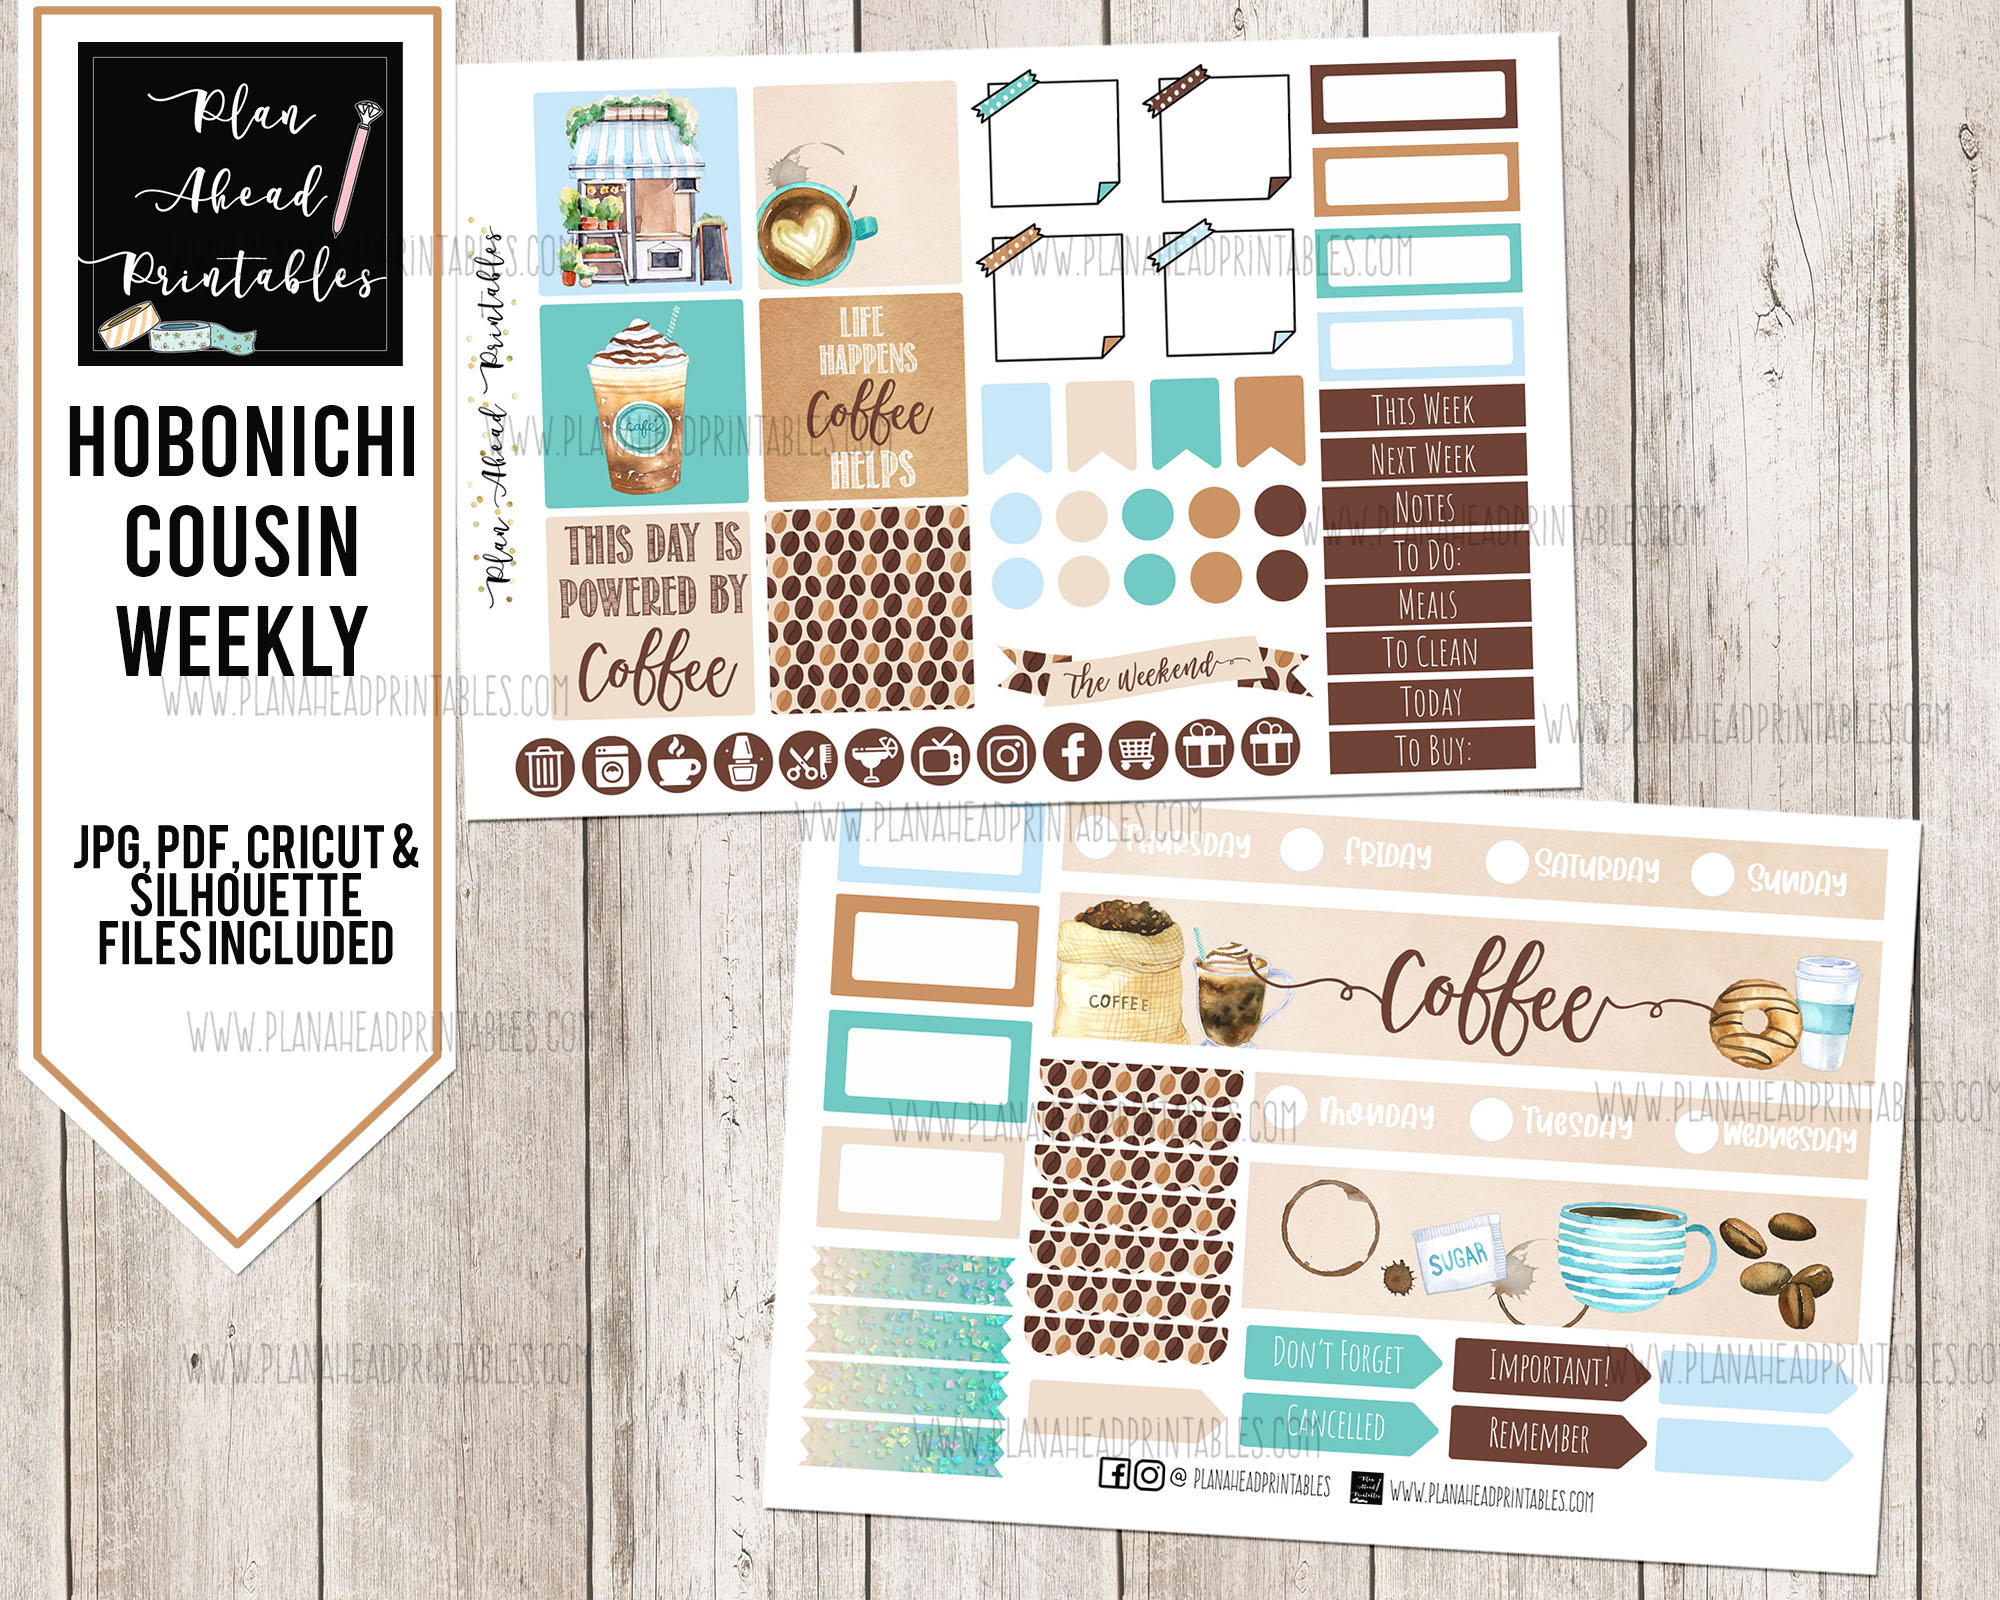 Printable Stickers for Planners, Scrapbooking or Card Making, Valentine  Glam Day Planner Love